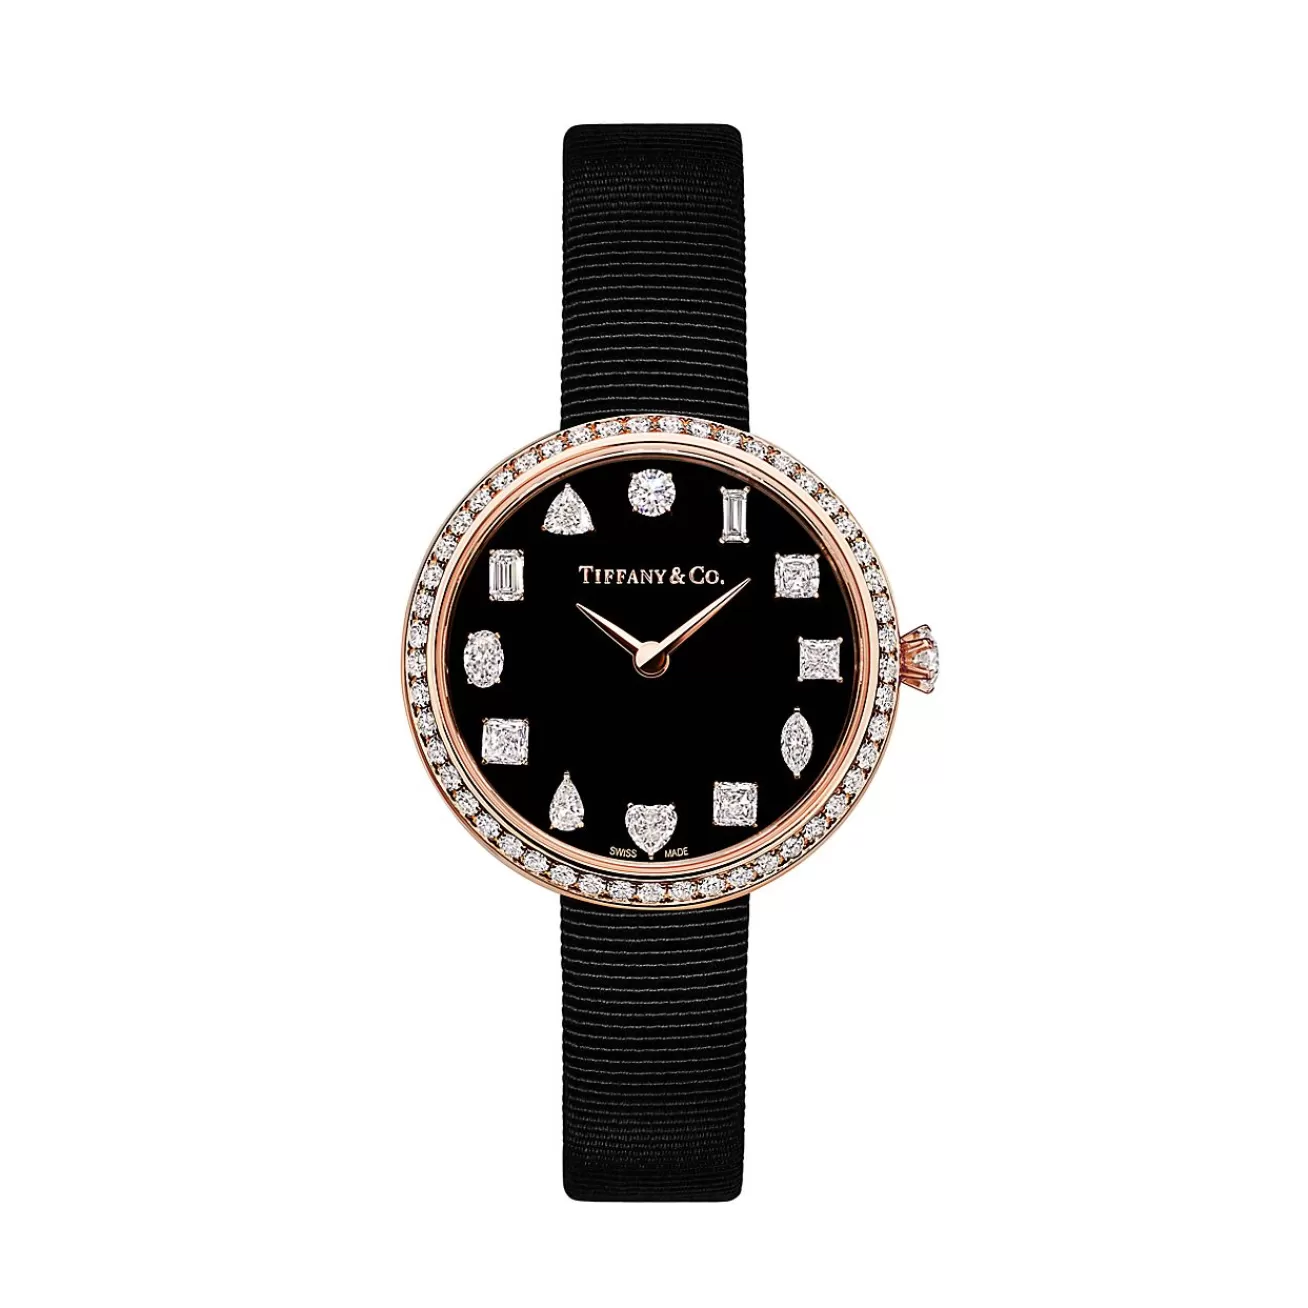 Tiffany & Co. Tiffany Eternity 32 mm Round Watch in Rose Gold with Diamonds | ^Women Fine Watches | Women’s Watches